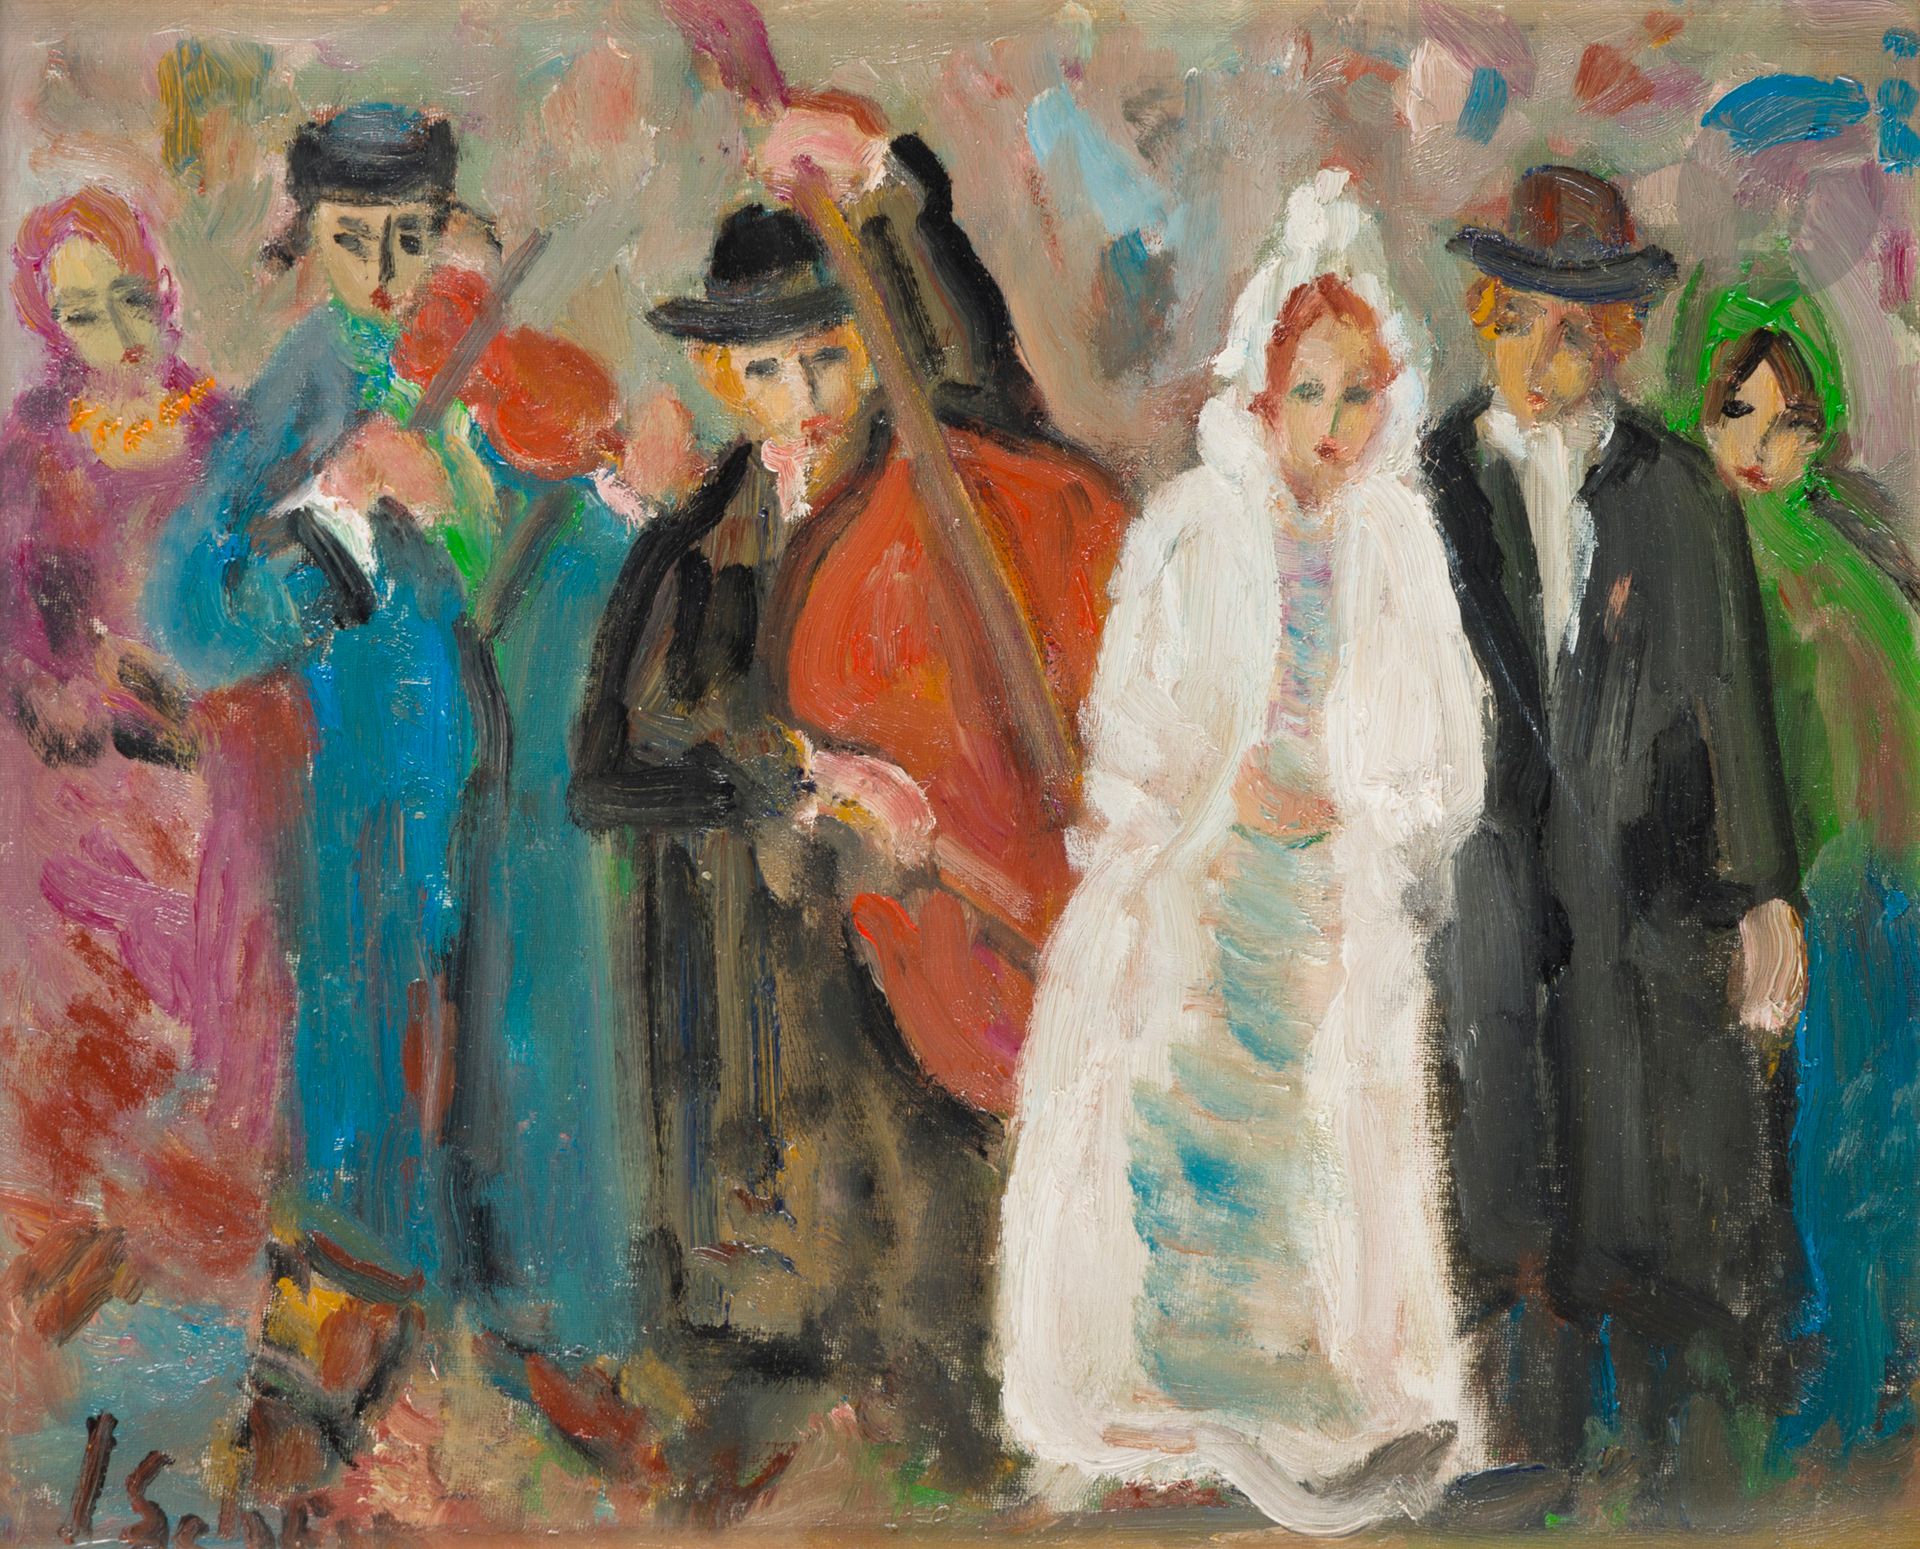 Null Joseph SCHEIN (1915-2001)
After the ceremony
Oil on isorel.
Signed lower le&hellip;